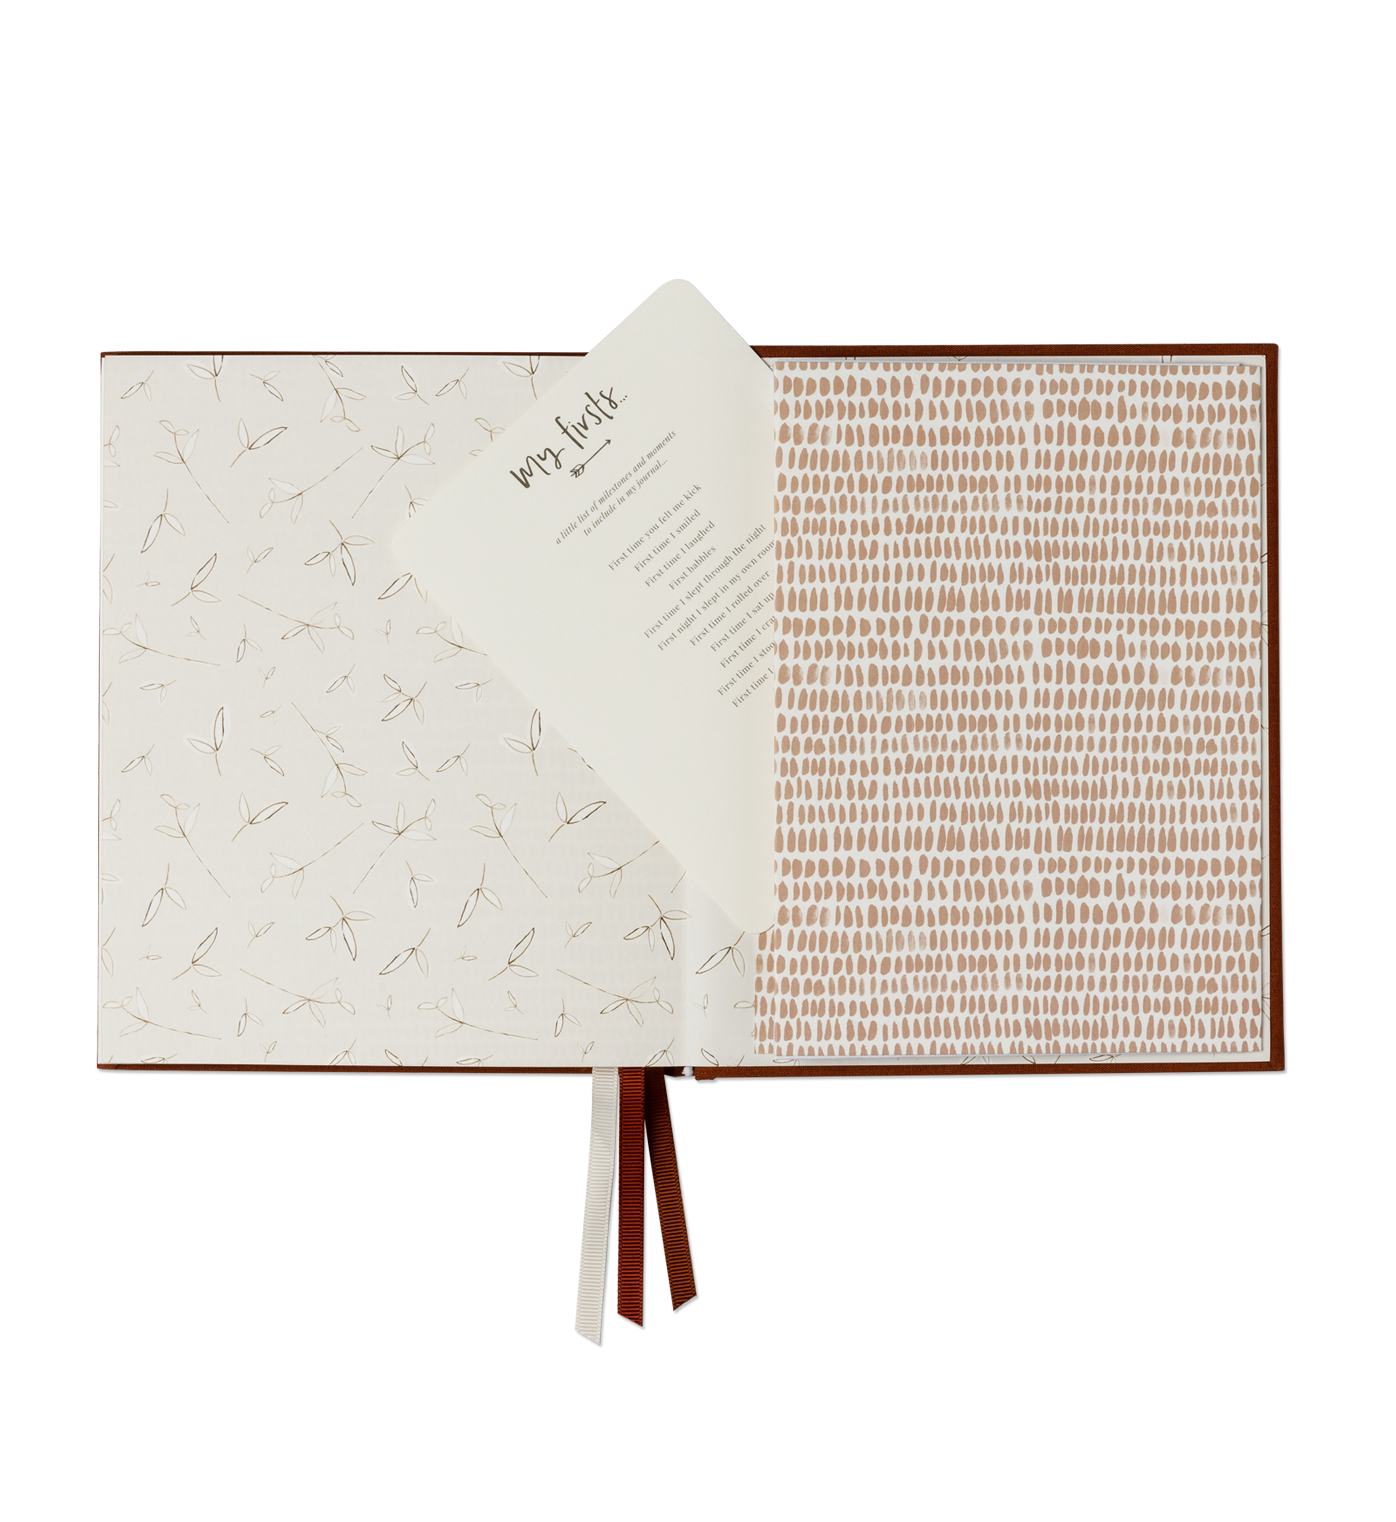 An Emma Kate Co. little dreamer baby journal in pecan with pages open to showcase the journal.